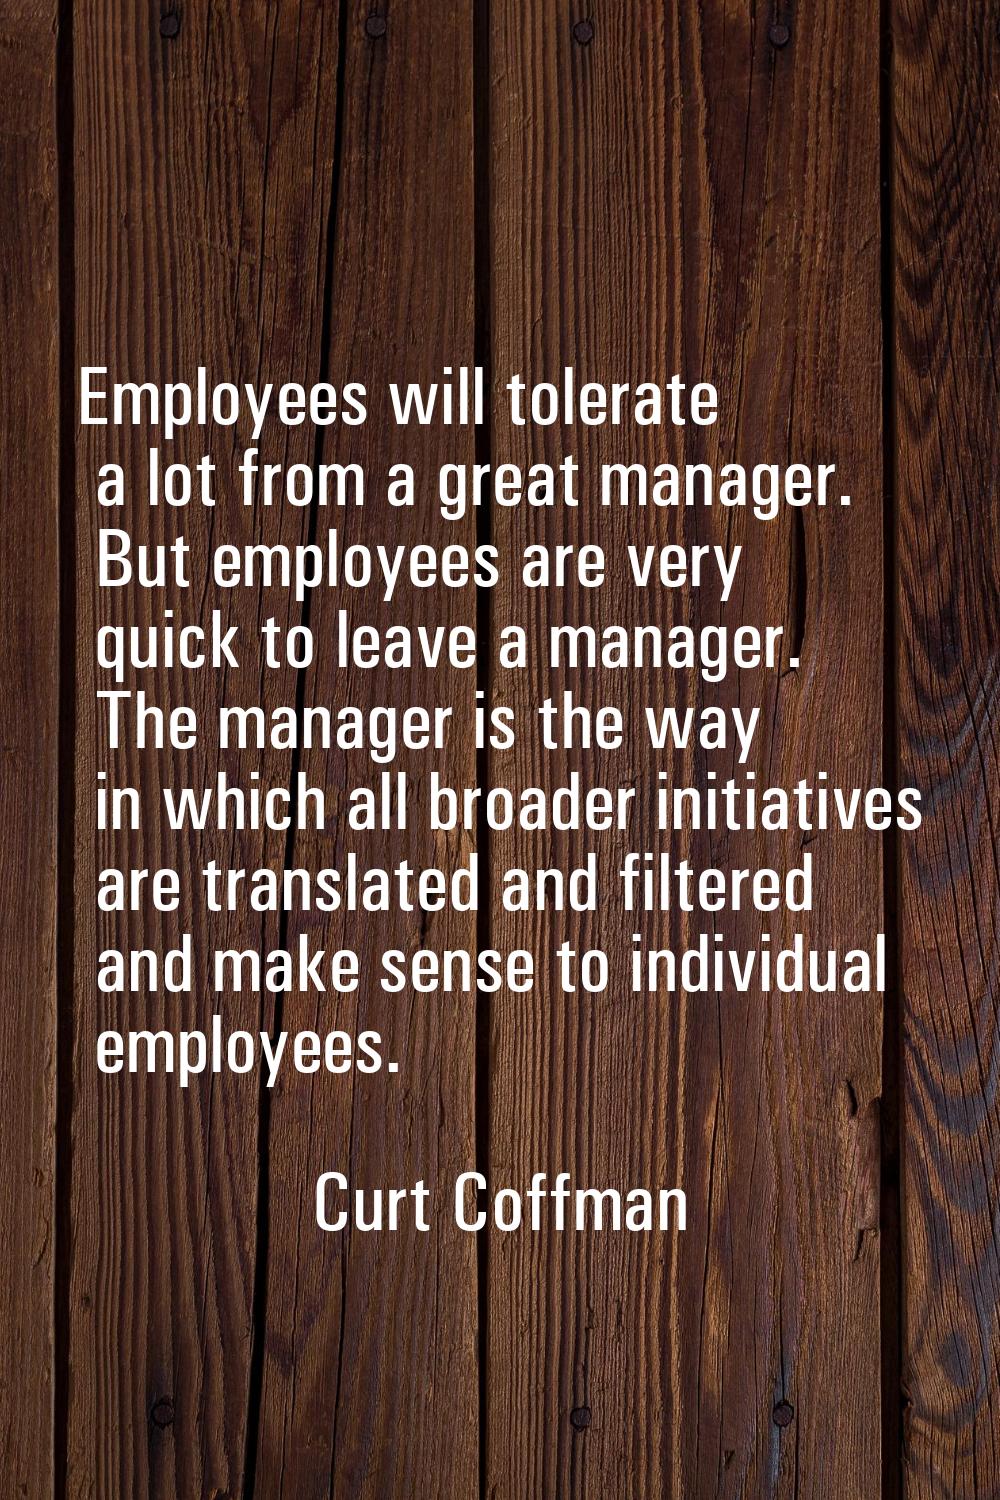 Employees will tolerate a lot from a great manager. But employees are very quick to leave a manager